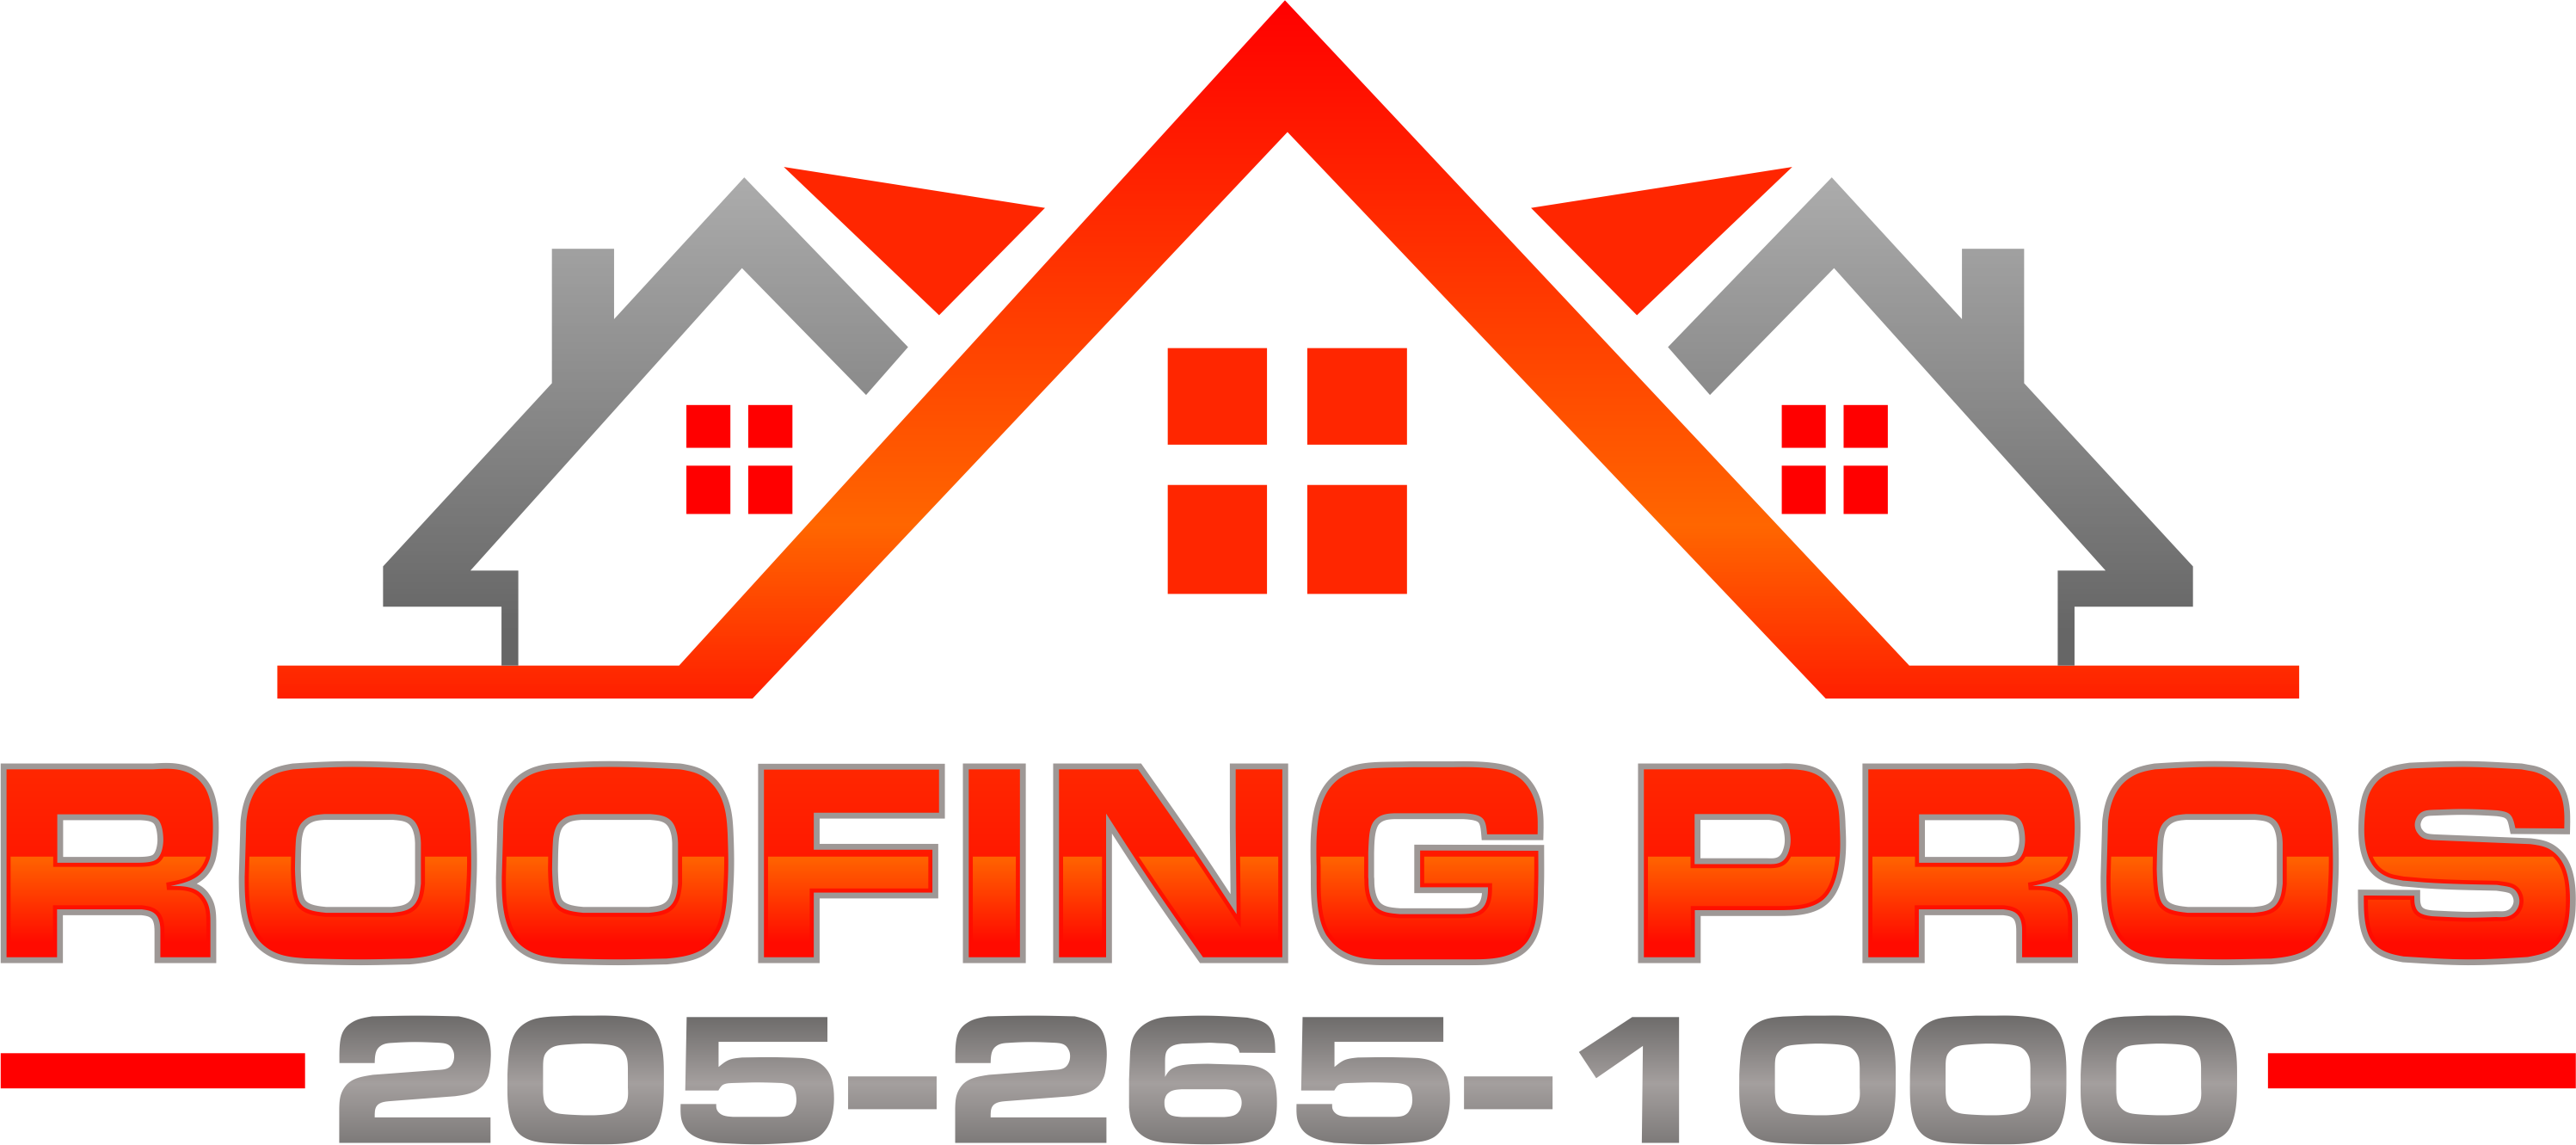 Roofing Pros Logo